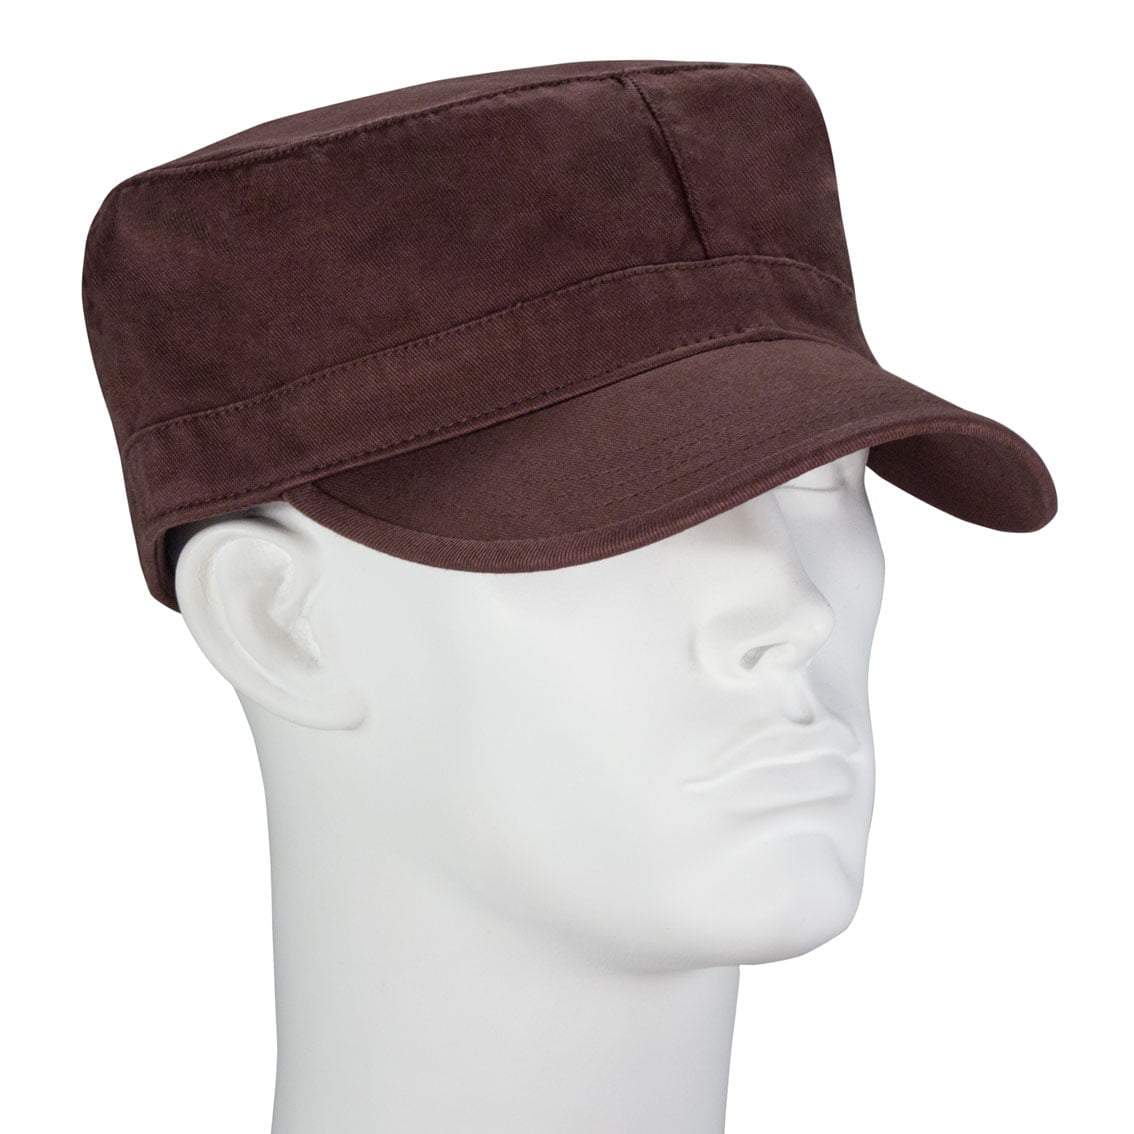 1pc Brown Solid Castro Military Fatigue Army Hat - Fitted - Unconstructed - 100% Cotton